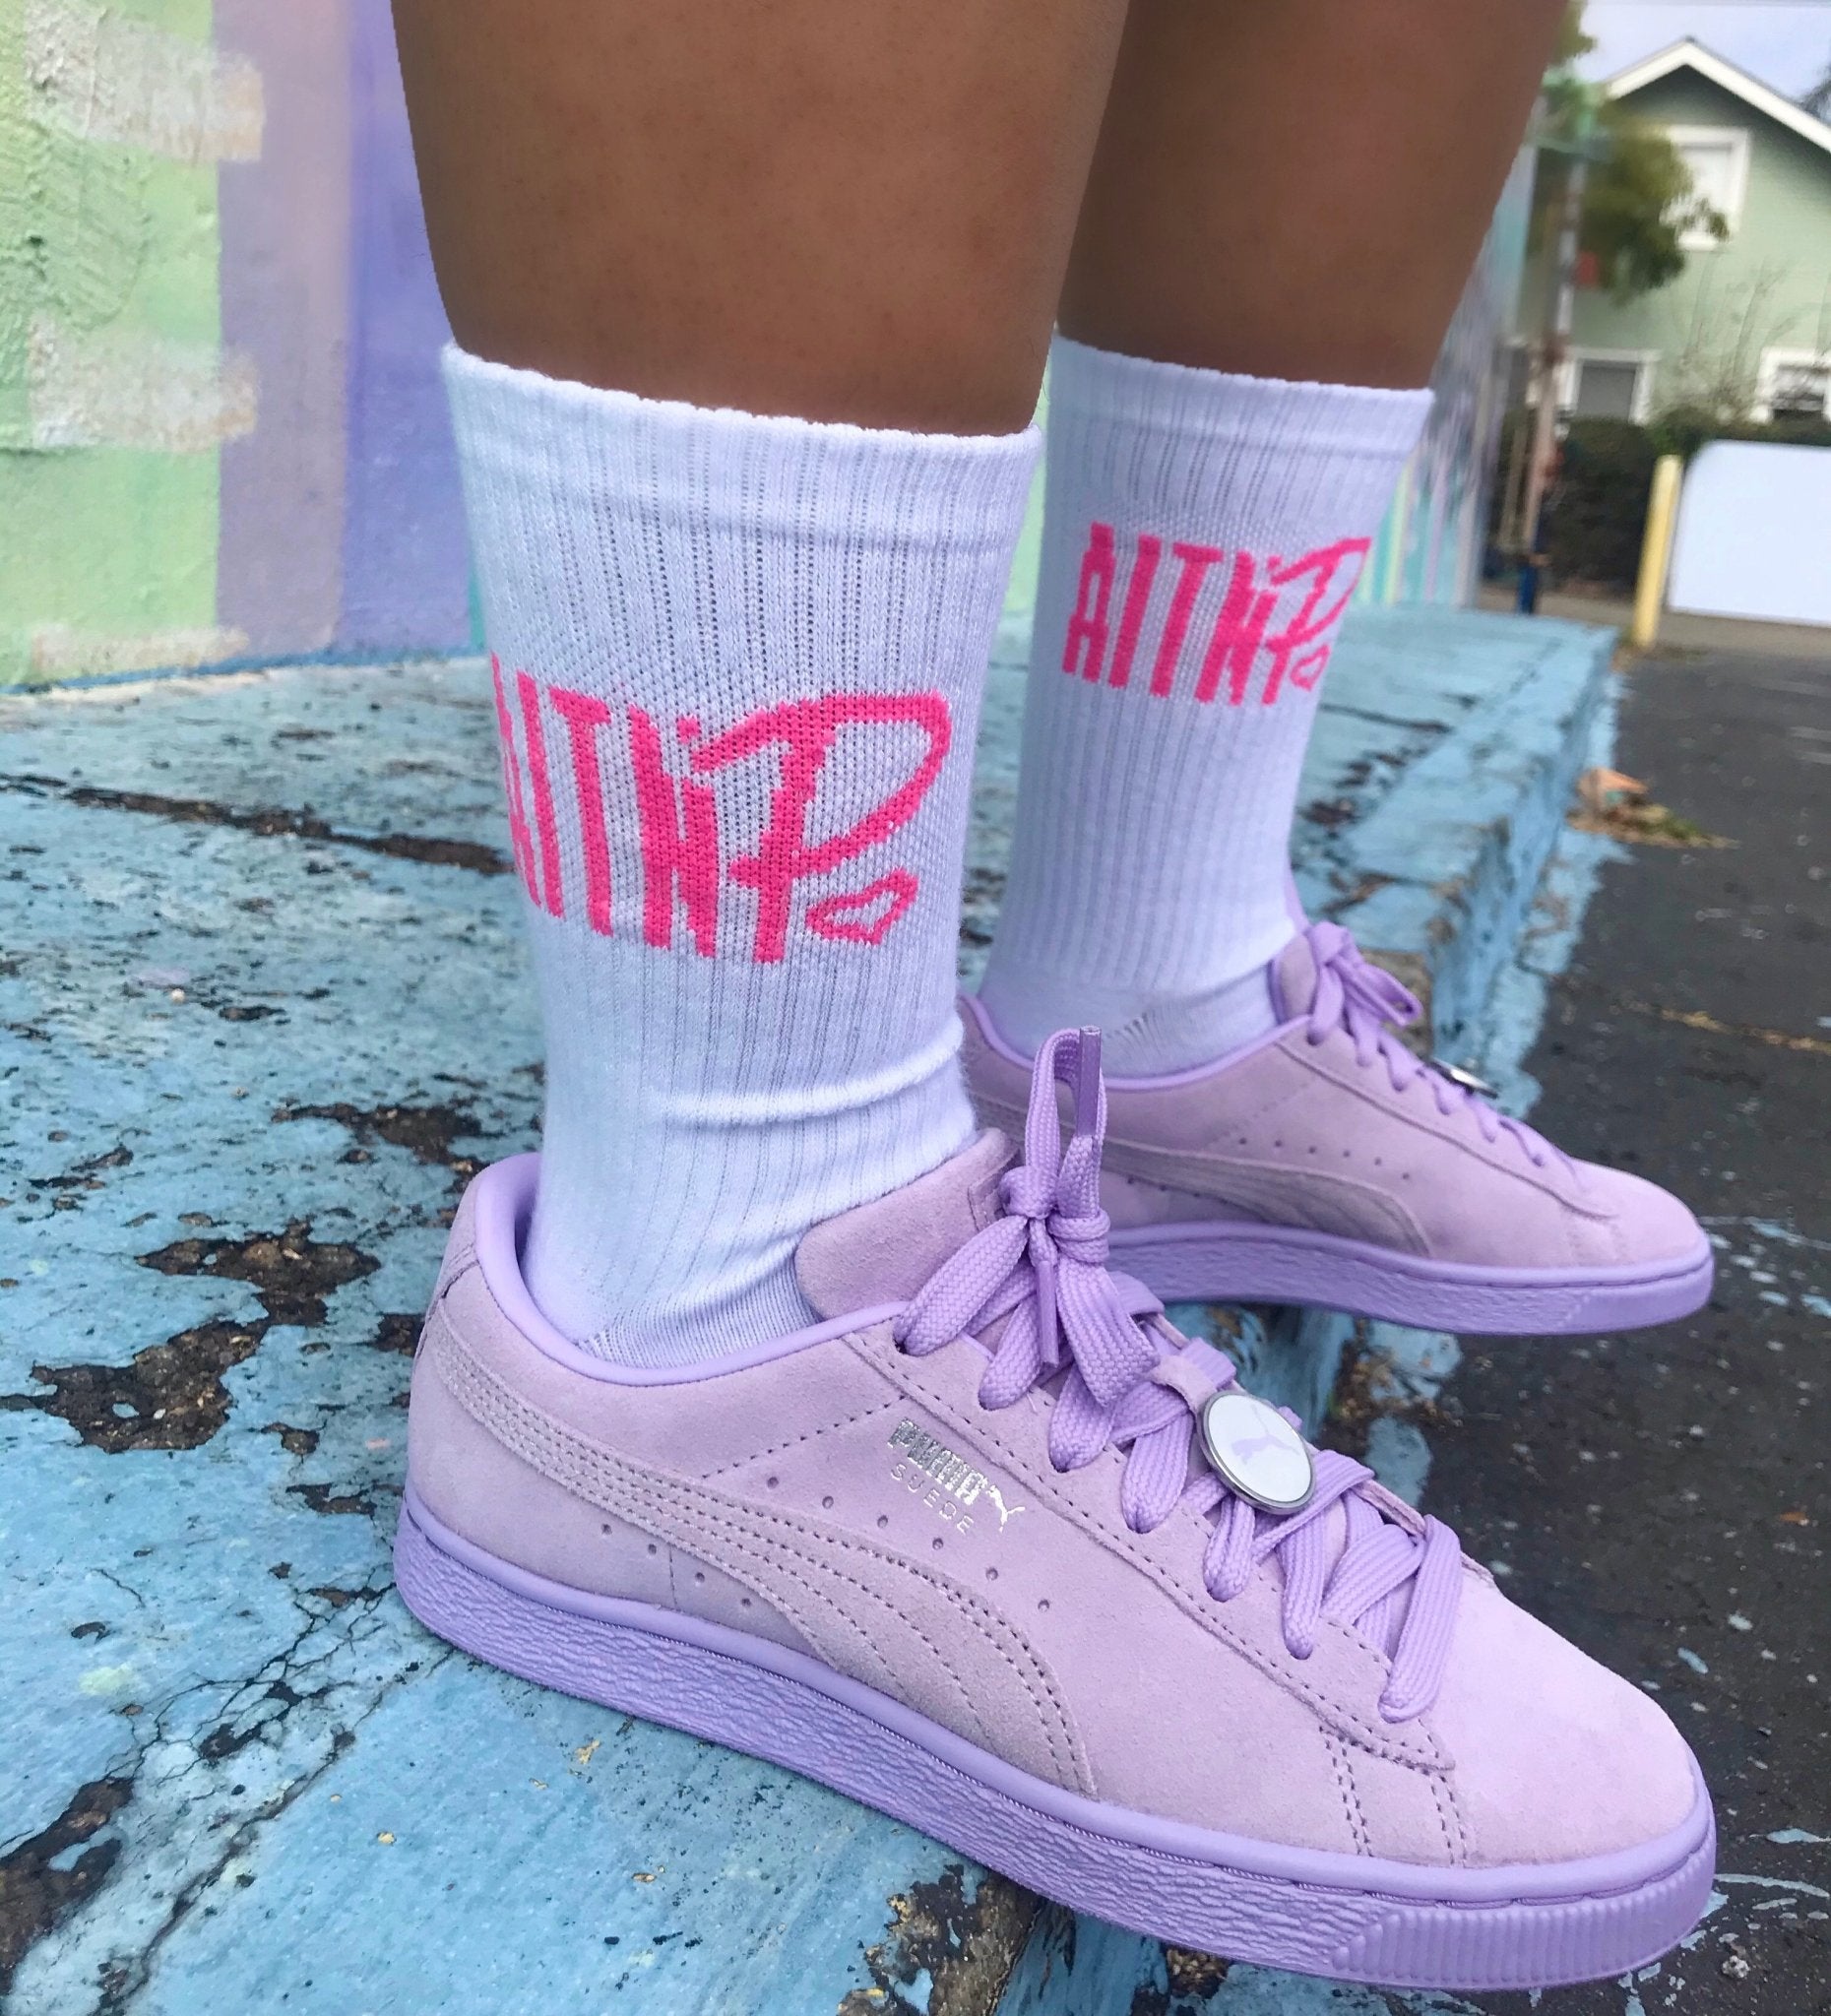 AITNP Essentials Socks - Ambition Is The New Pink